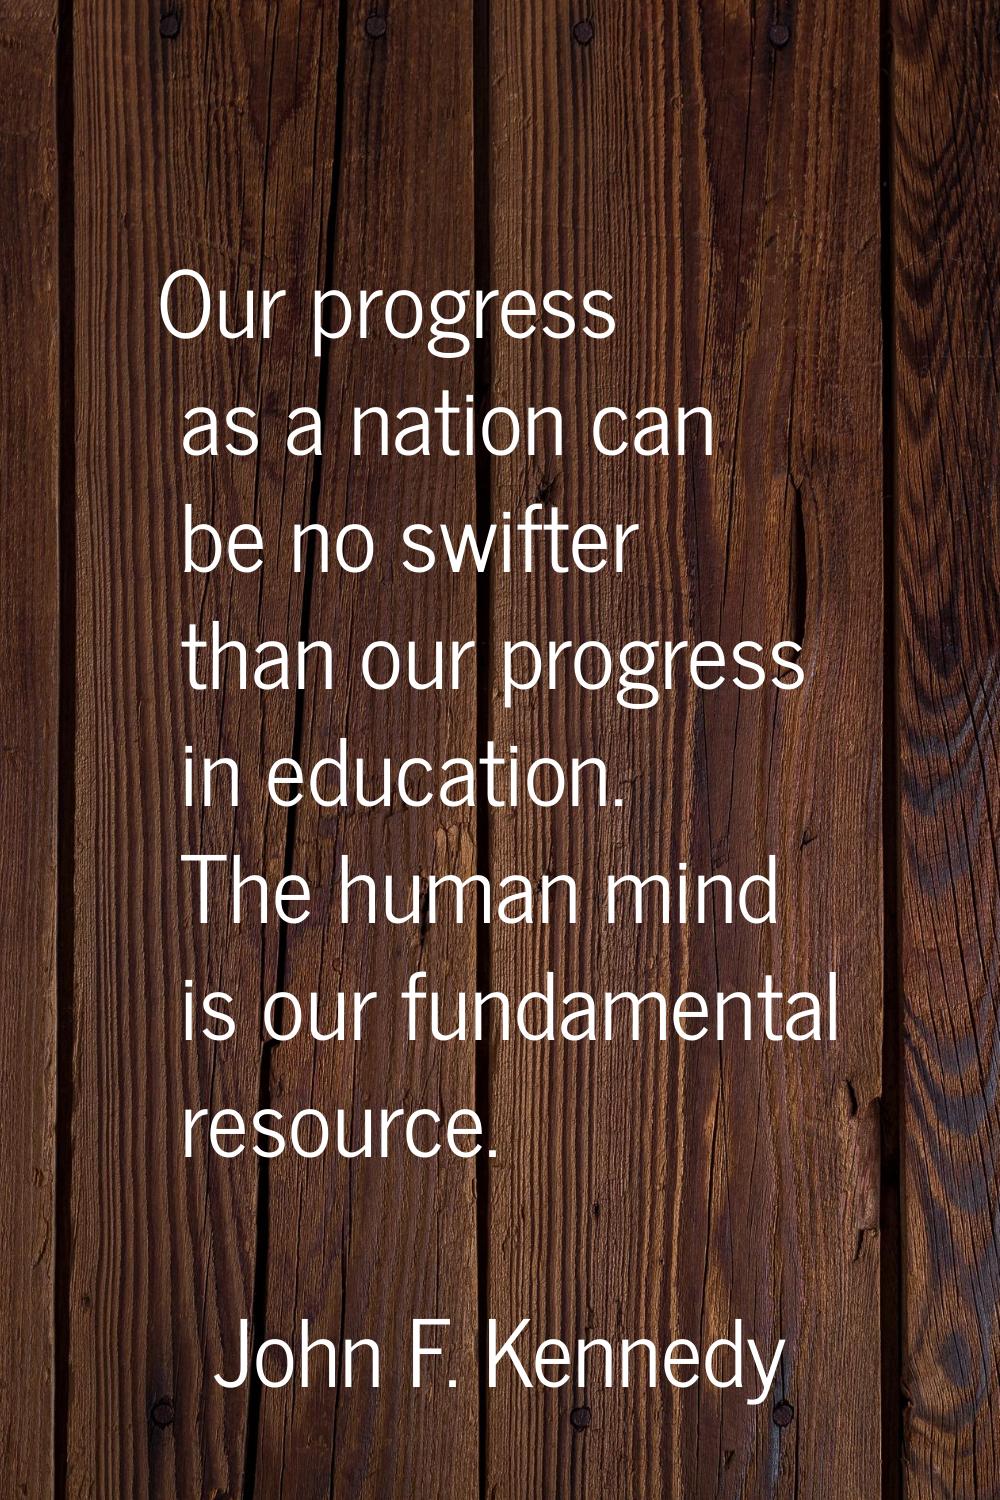 Our progress as a nation can be no swifter than our progress in education. The human mind is our fu